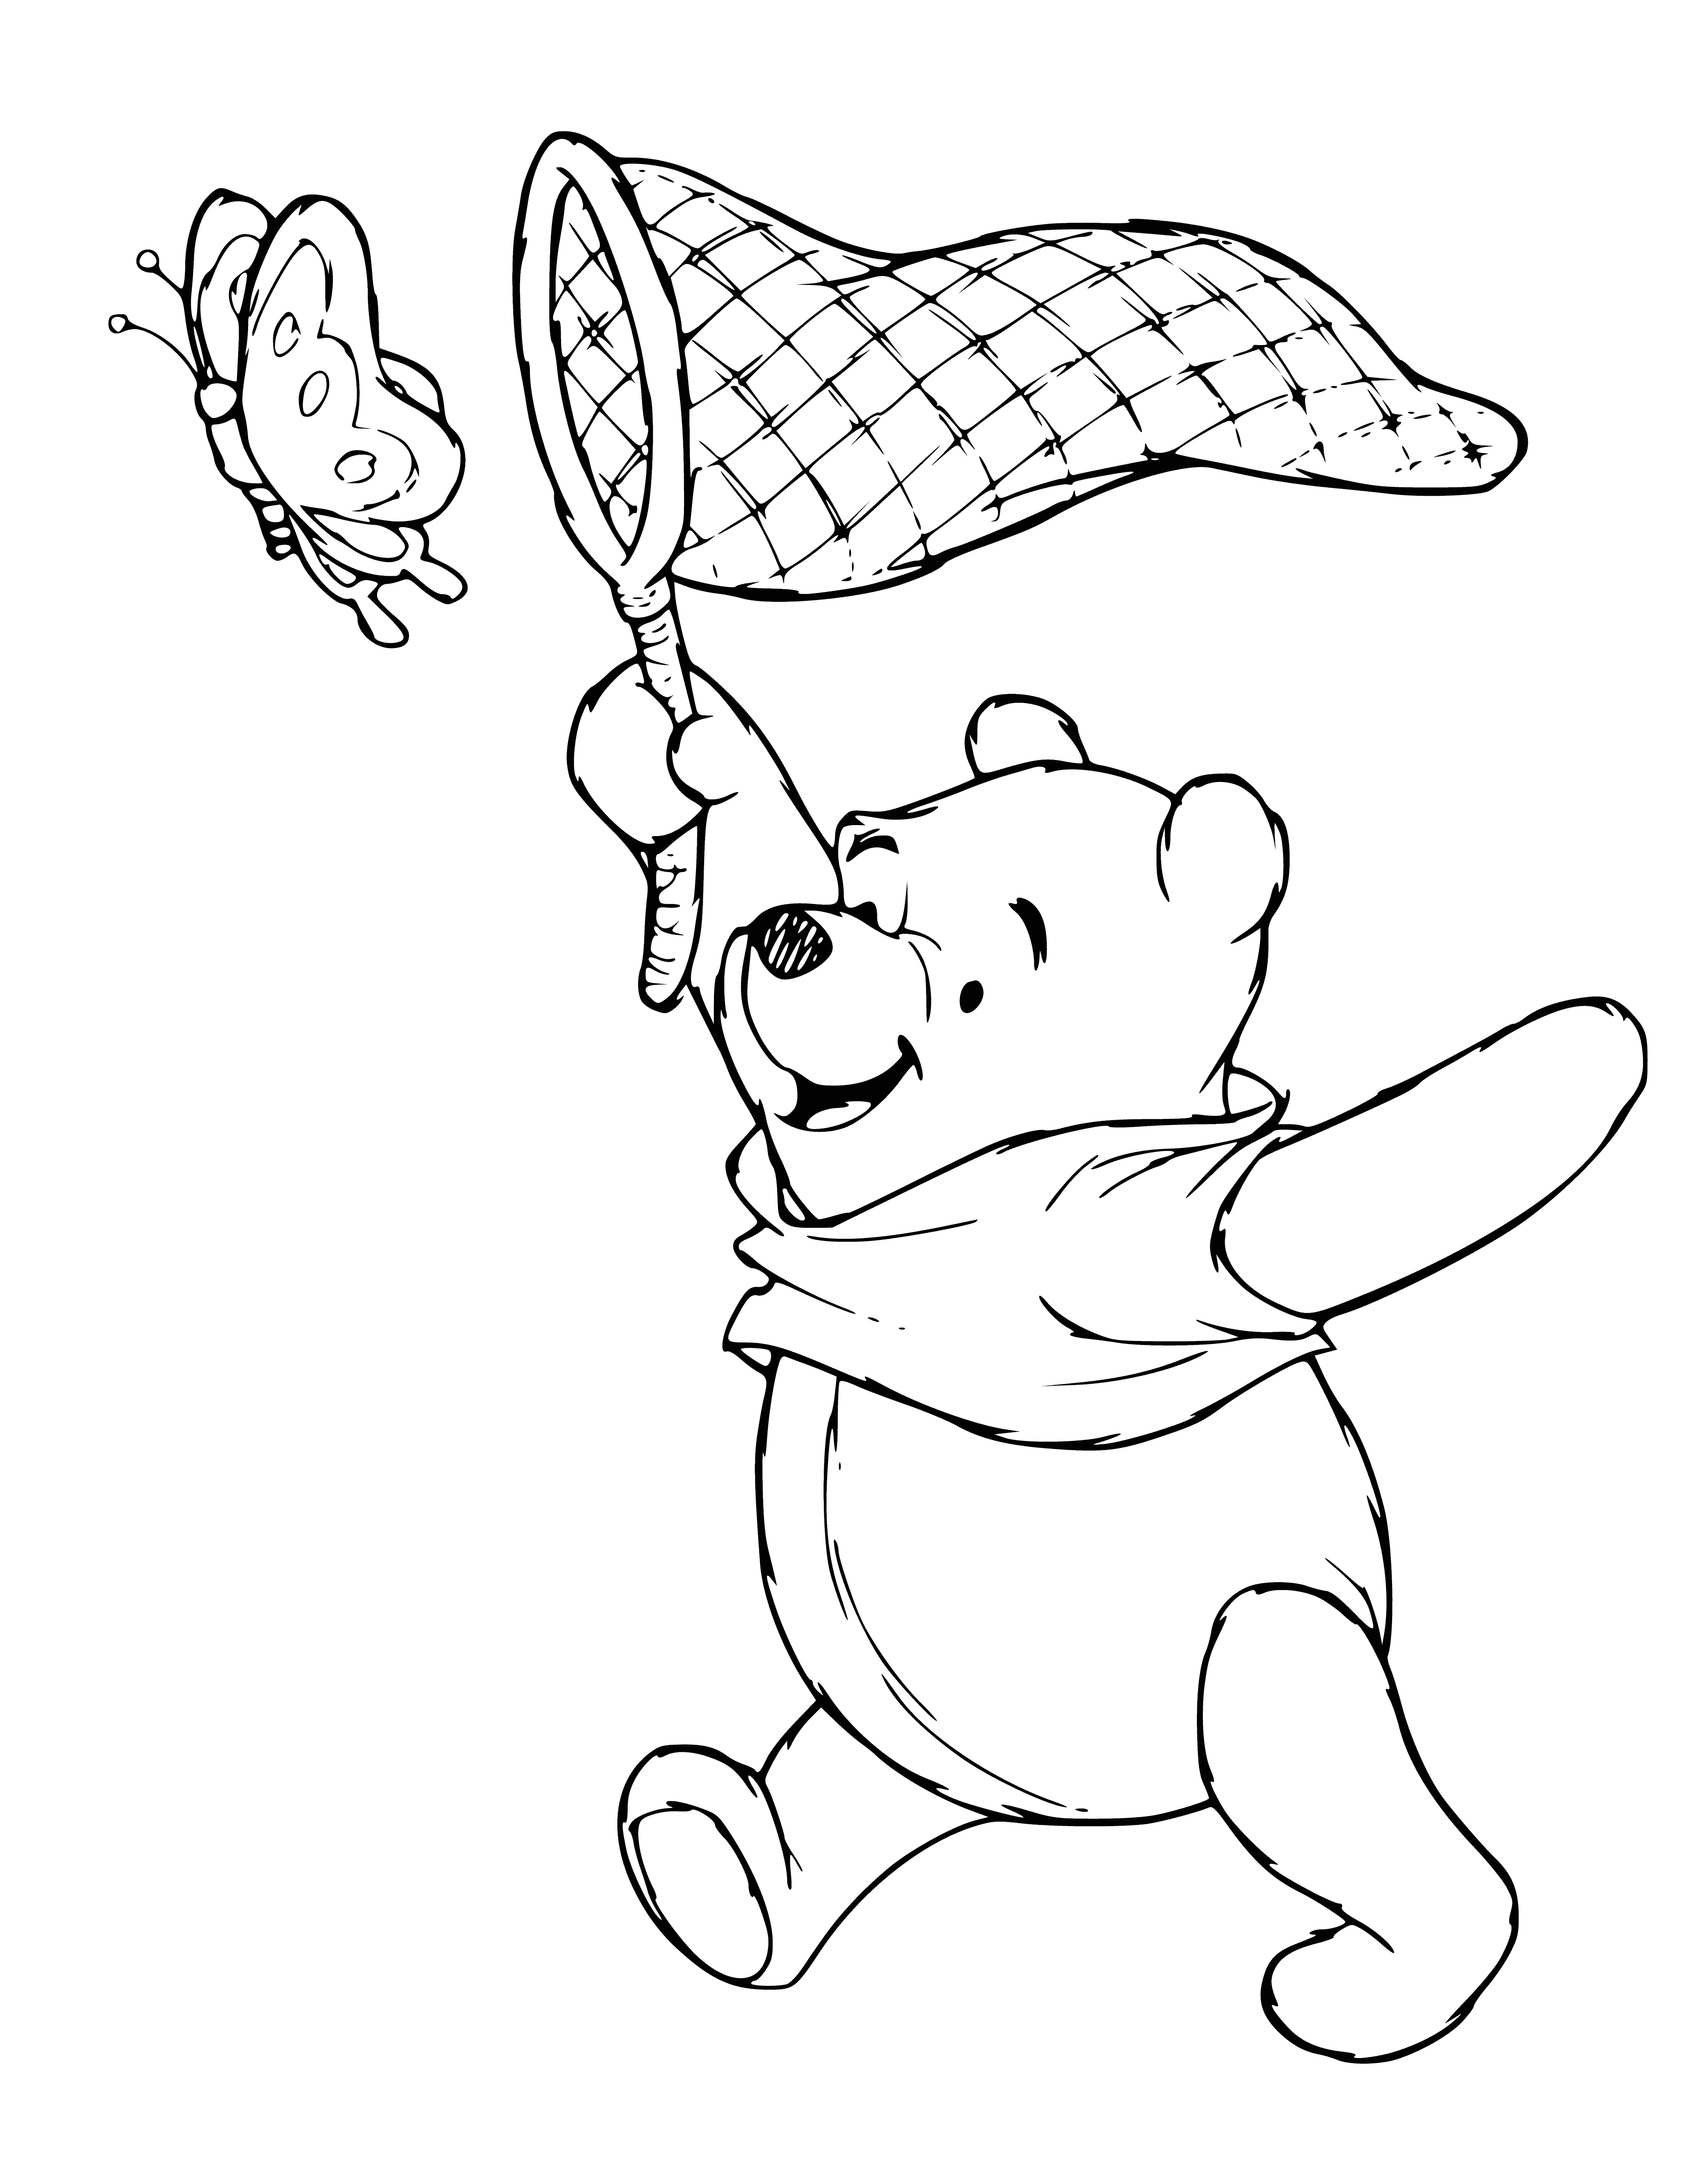 coloring page: She chases it around the meadow, but it escapes into the trees.

Winnie chases a butterfly around a meadow, but it escapes into the trees.